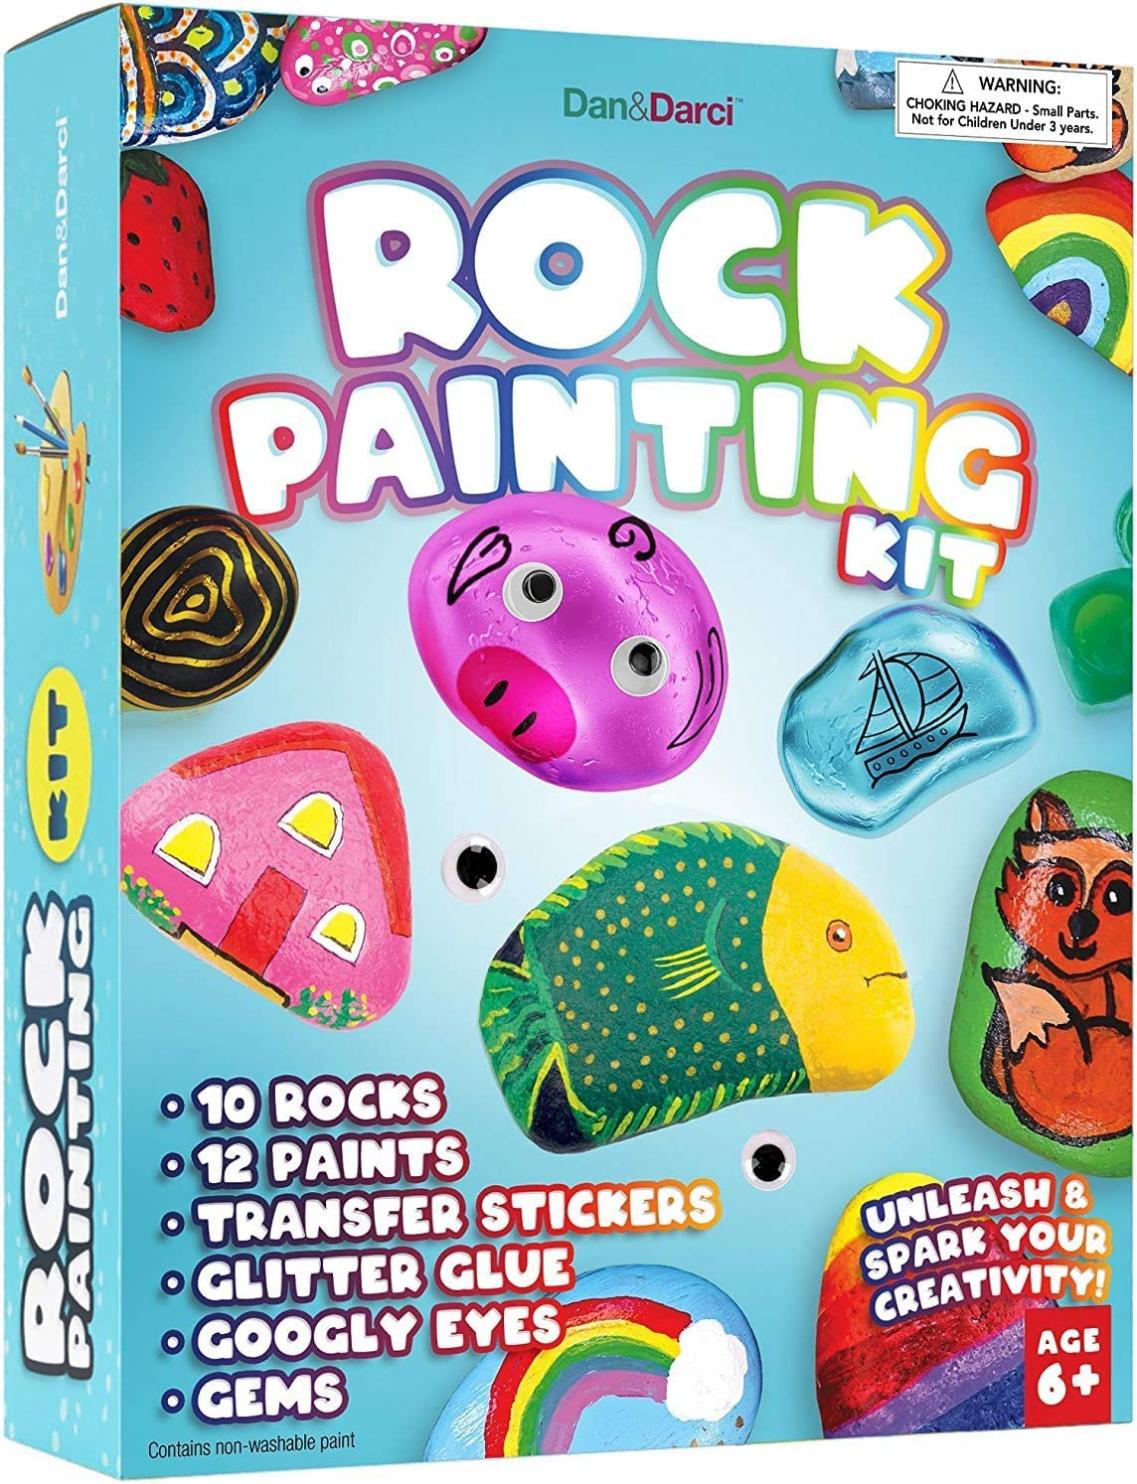 Dan&Darci Rock Painting Kit for Kids - Arts and Crafts for Girls & Boys Ages 6-12 - Craft Kits Art Set - Supplies for Painting Rocks - Best Tween Paint Gift, Ideas for Kids Activities Age 6 7 8 9 10